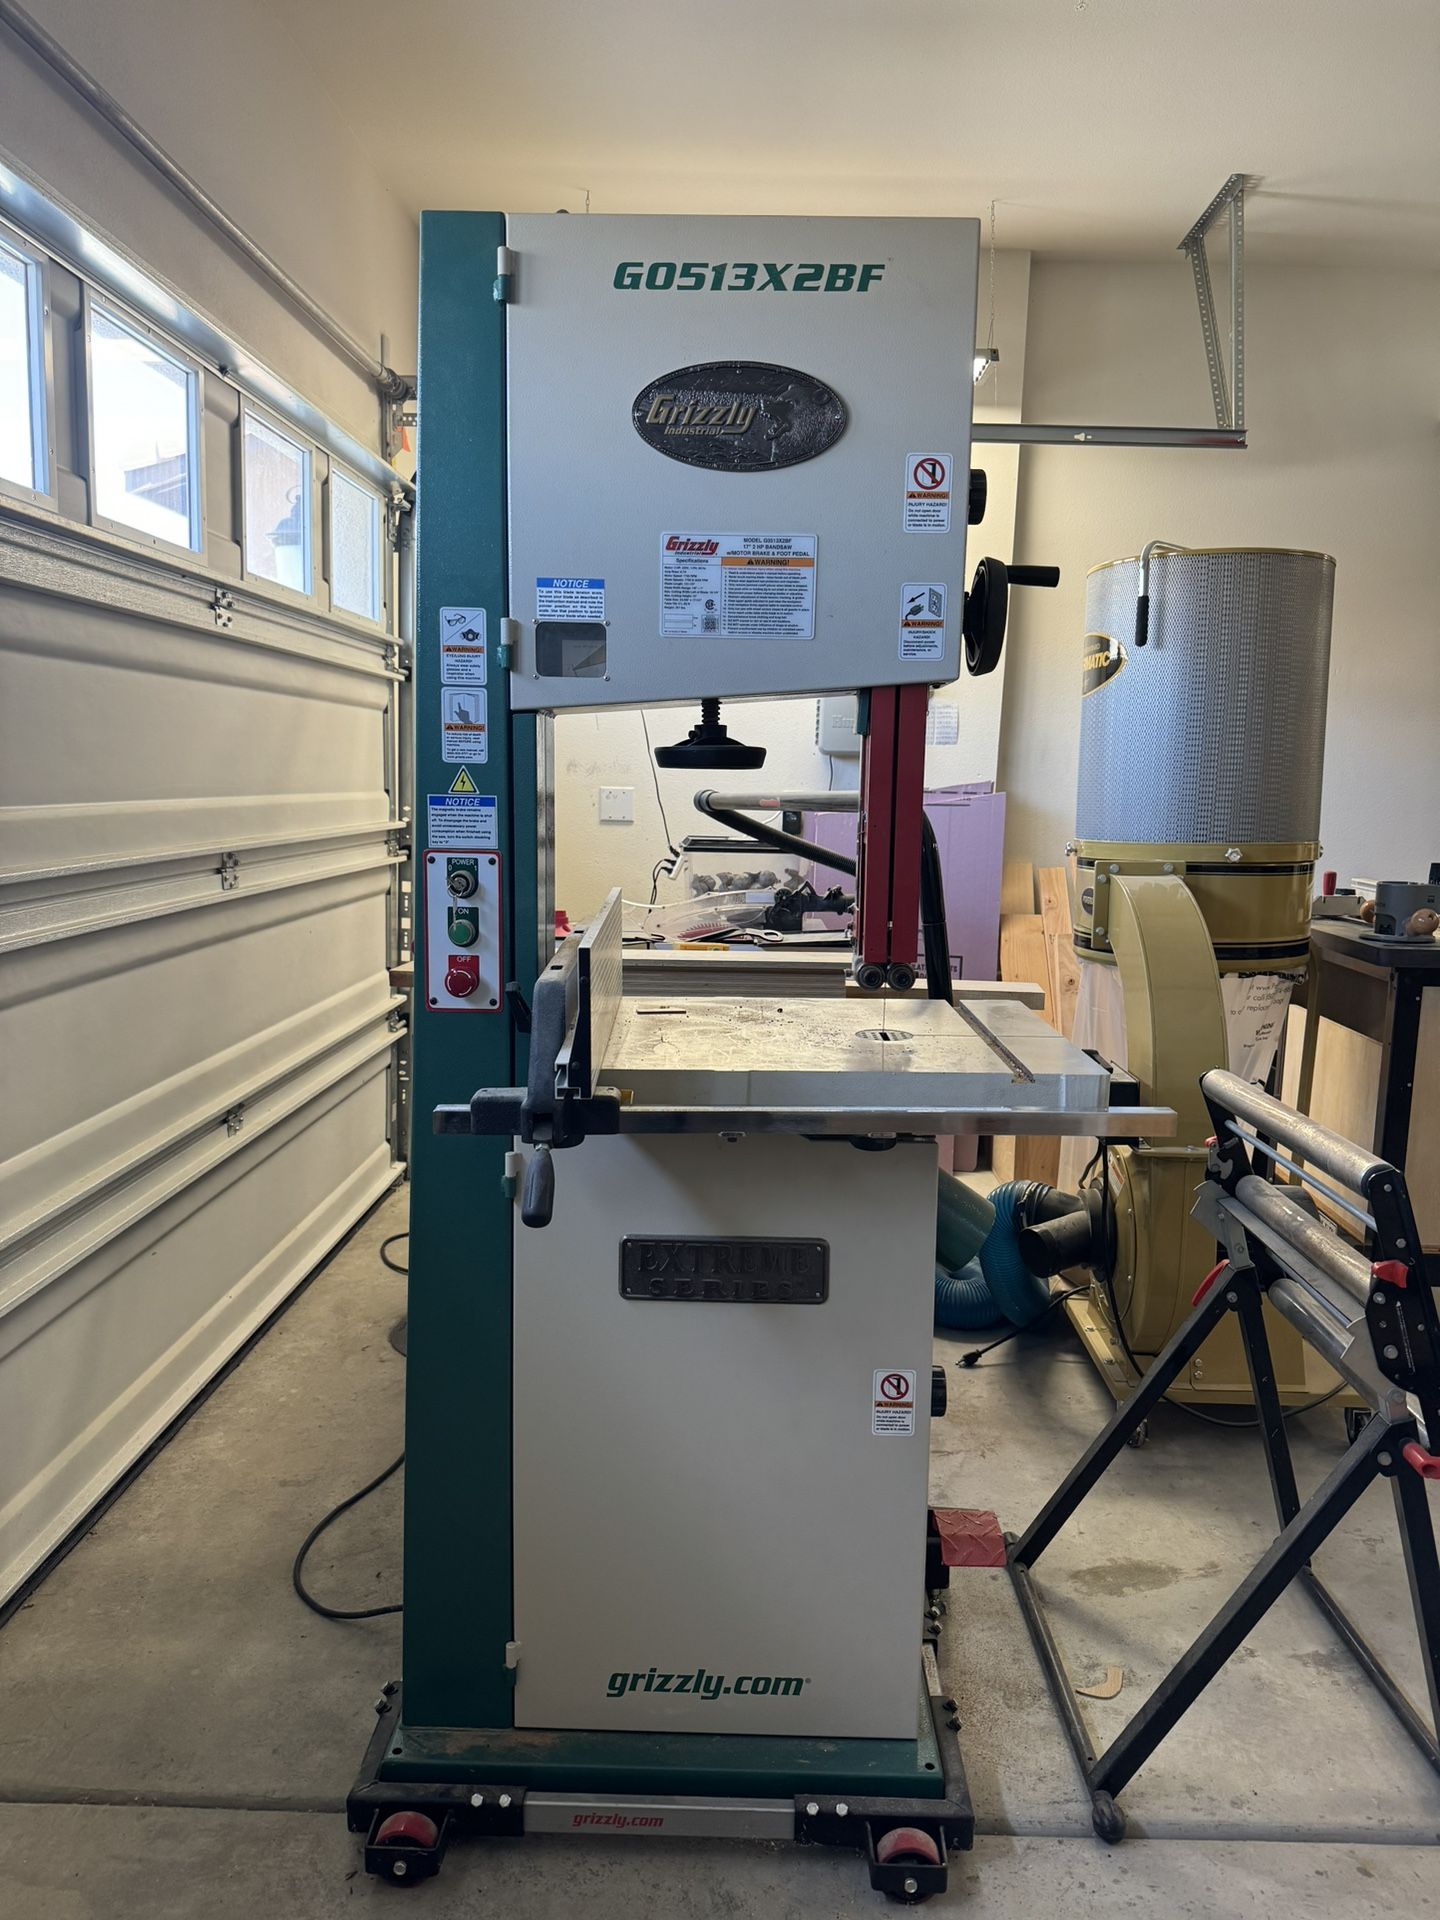  Grizzly G0513x2bf Bandsaw 